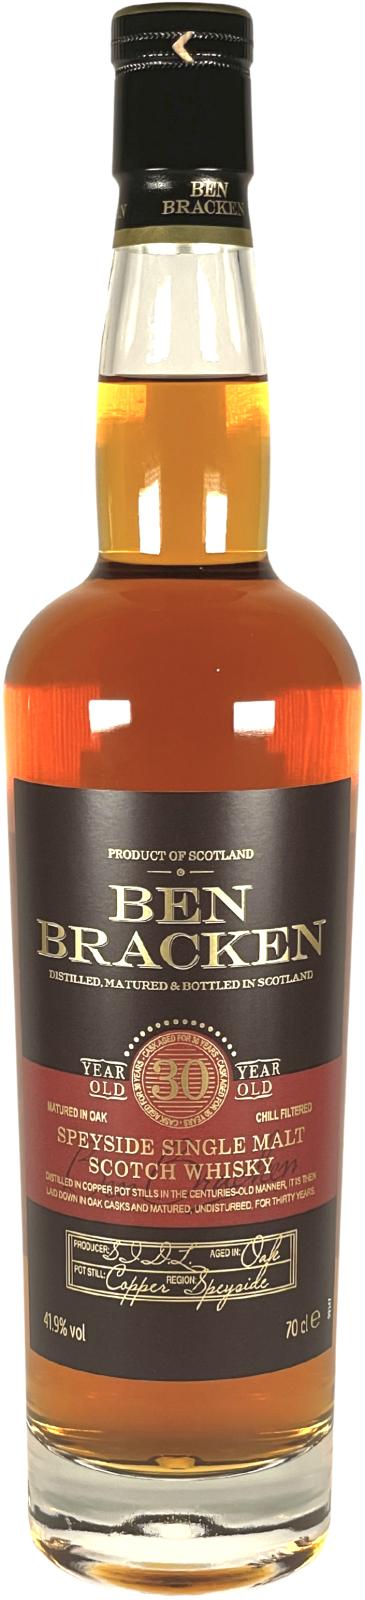 and Ben - Ratings reviews Whiskybase - 30-year-old TSID Bracken